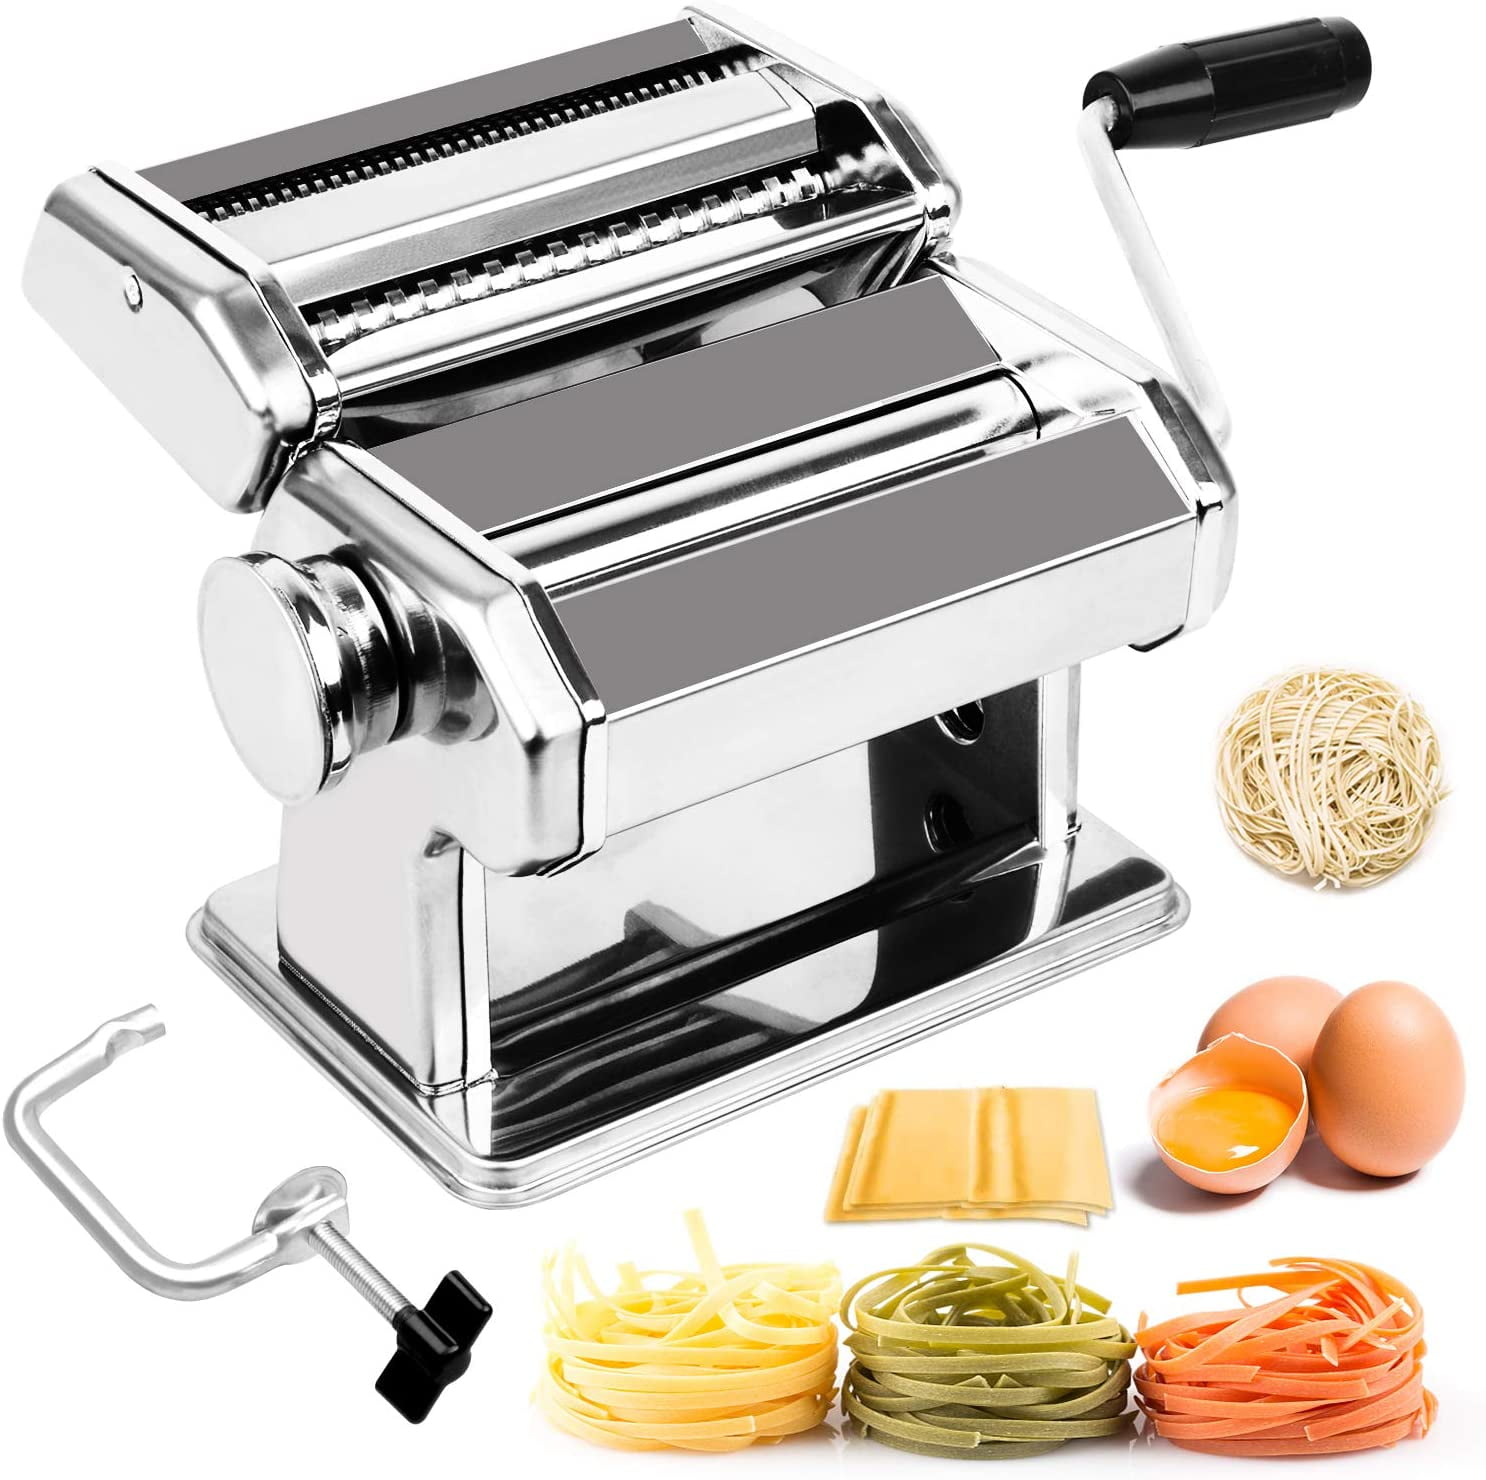 FOCOLABU Pasta Machine Stainless Steel Manual Pasta Maker Machine with 8 Adjustable Thickness Settings or Dumpling Skins Lasagna Pasta Maker Suit for Homemade Spaghetti Fettuccini 